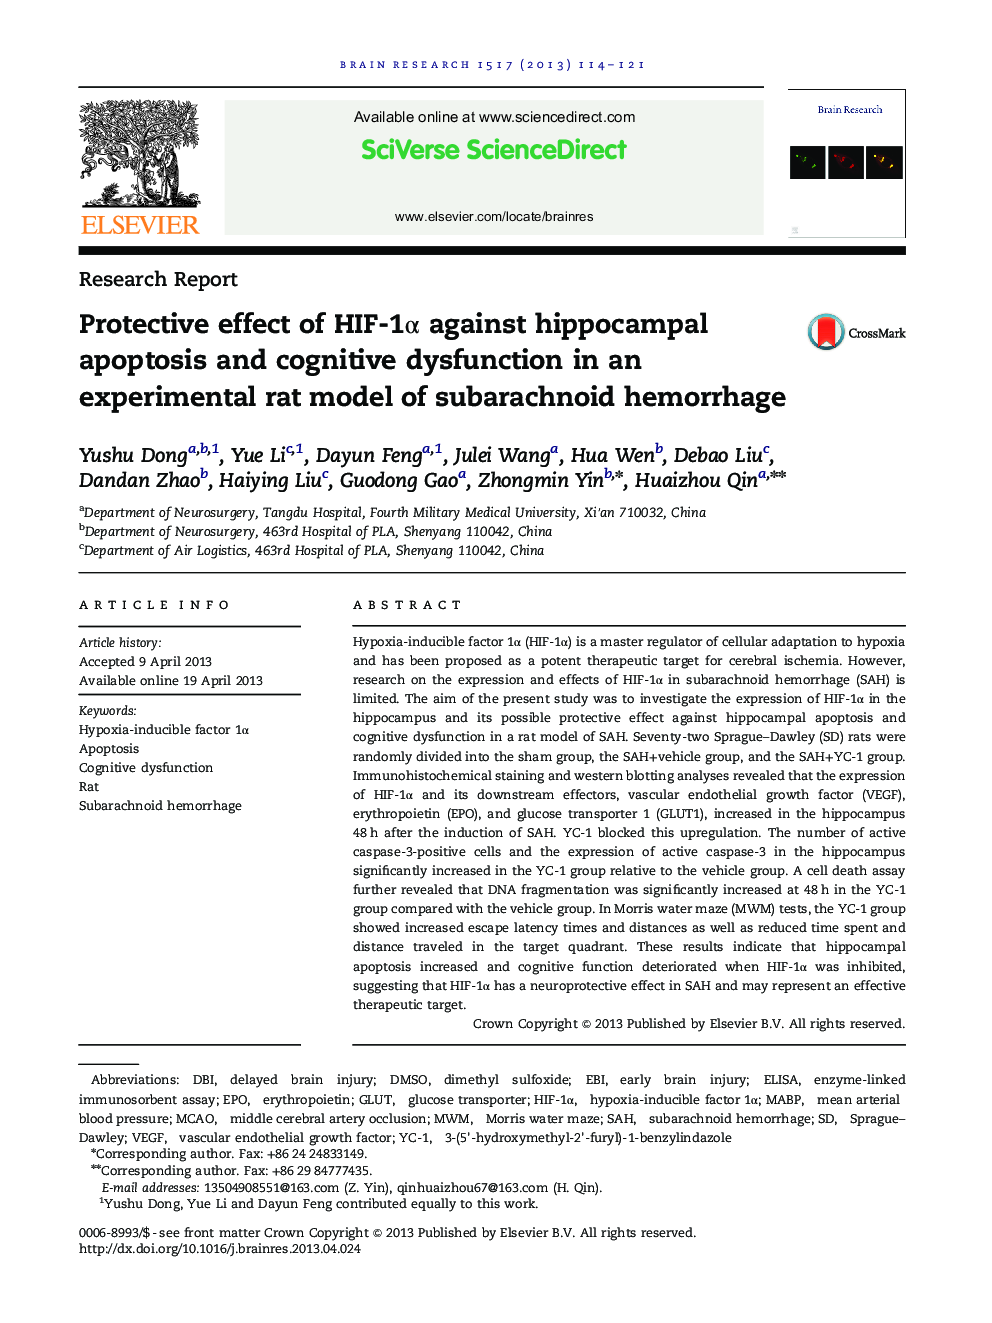 Research ReportProtective effect of HIF-1Î± against hippocampal apoptosis and cognitive dysfunction in an experimental rat model of subarachnoid hemorrhage